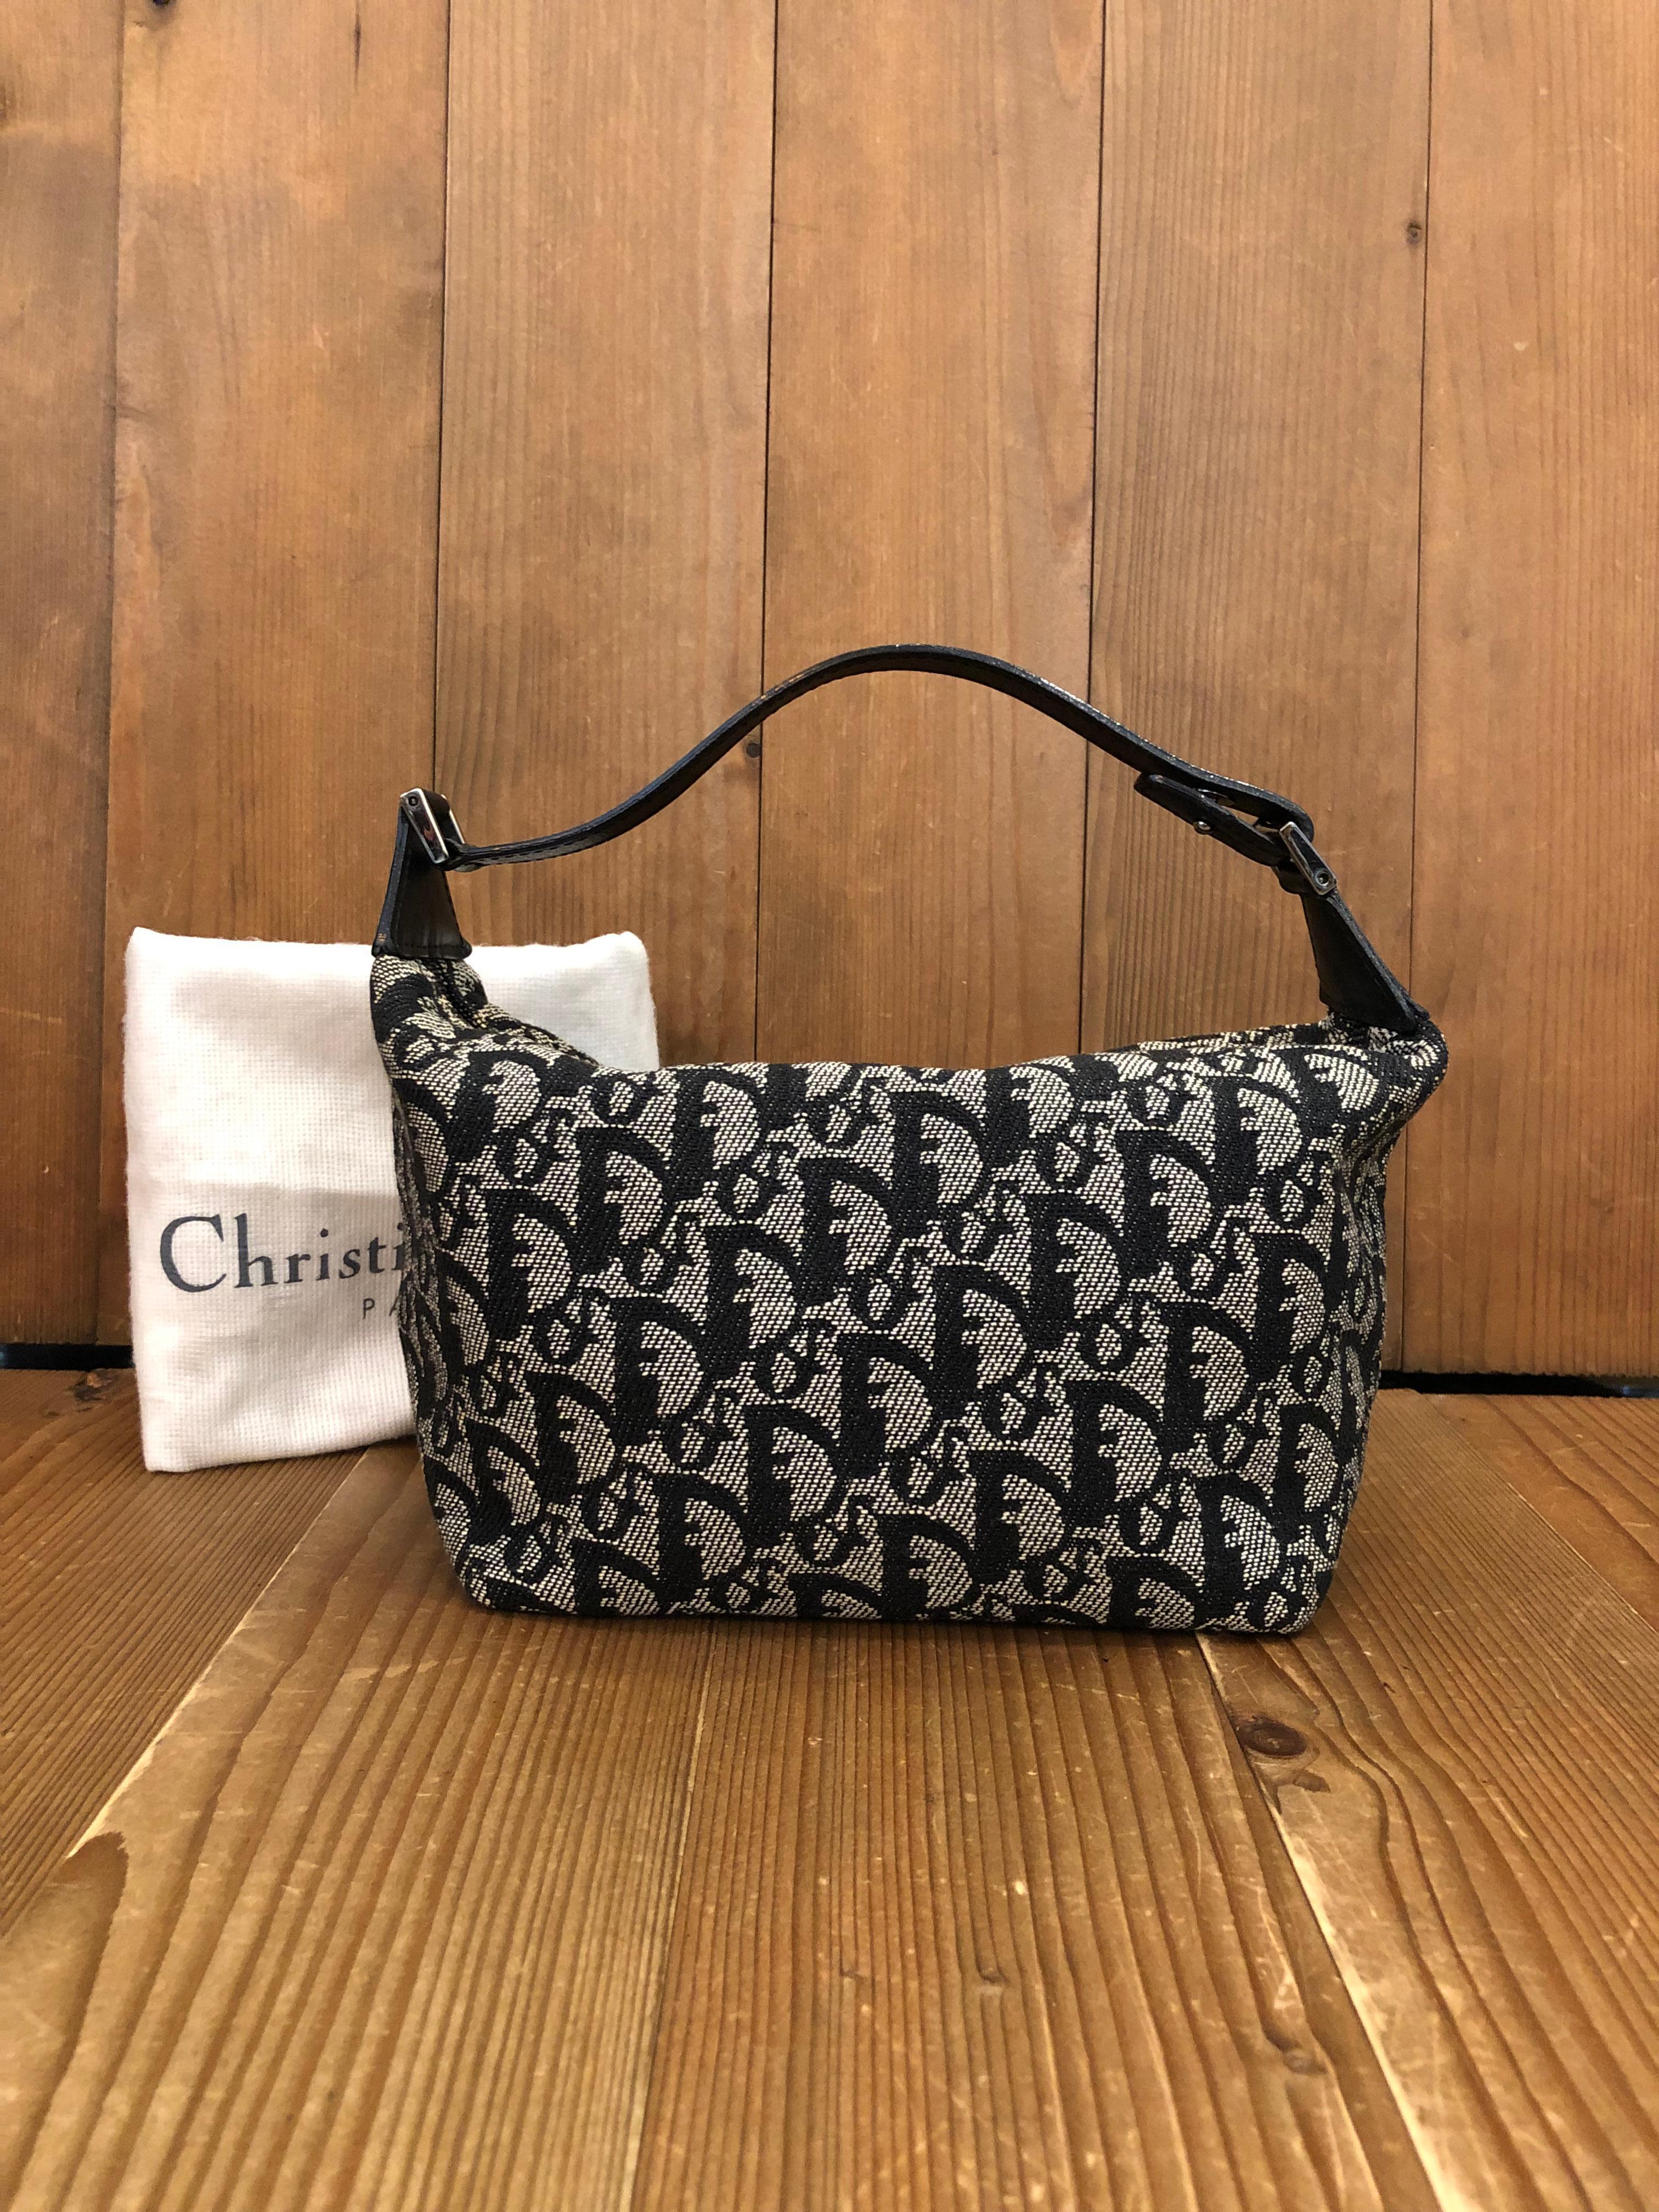 This vintage Christian Dior pouch handbag is crafted of Dior’s iconic trotter jacquard in black trimmed with black leather. Zip top closure opens to a black fabric interior with one zippered pocket. Made in Spain. Compact in size yet big enough for